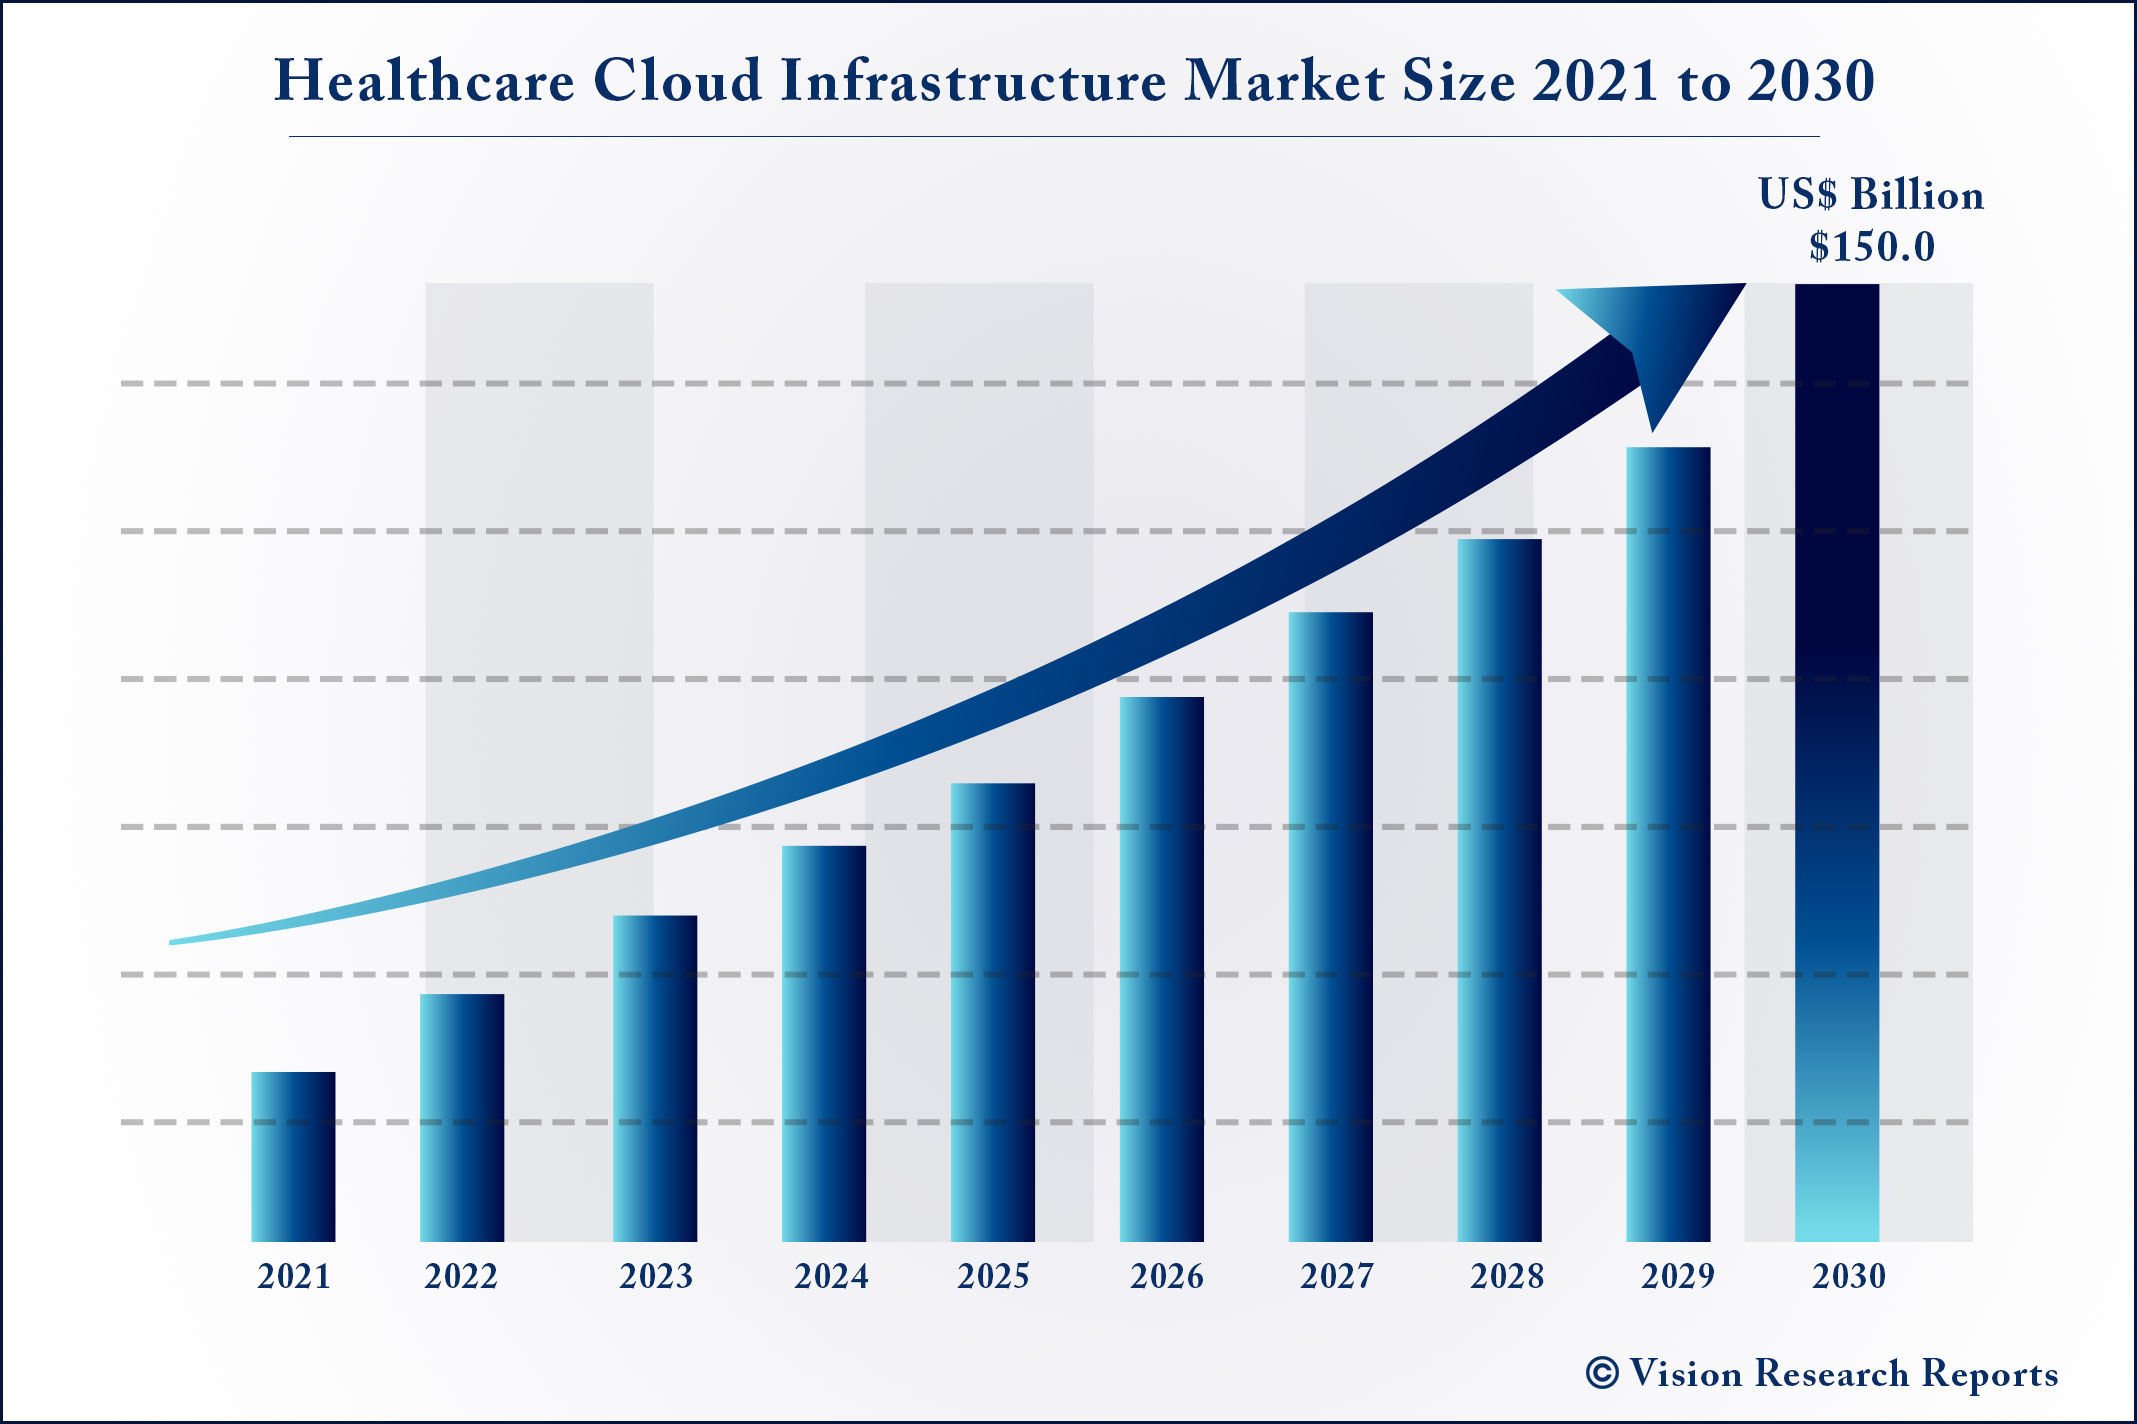 Healthcare Cloud Infrastructure Market Size 2021 to 2030